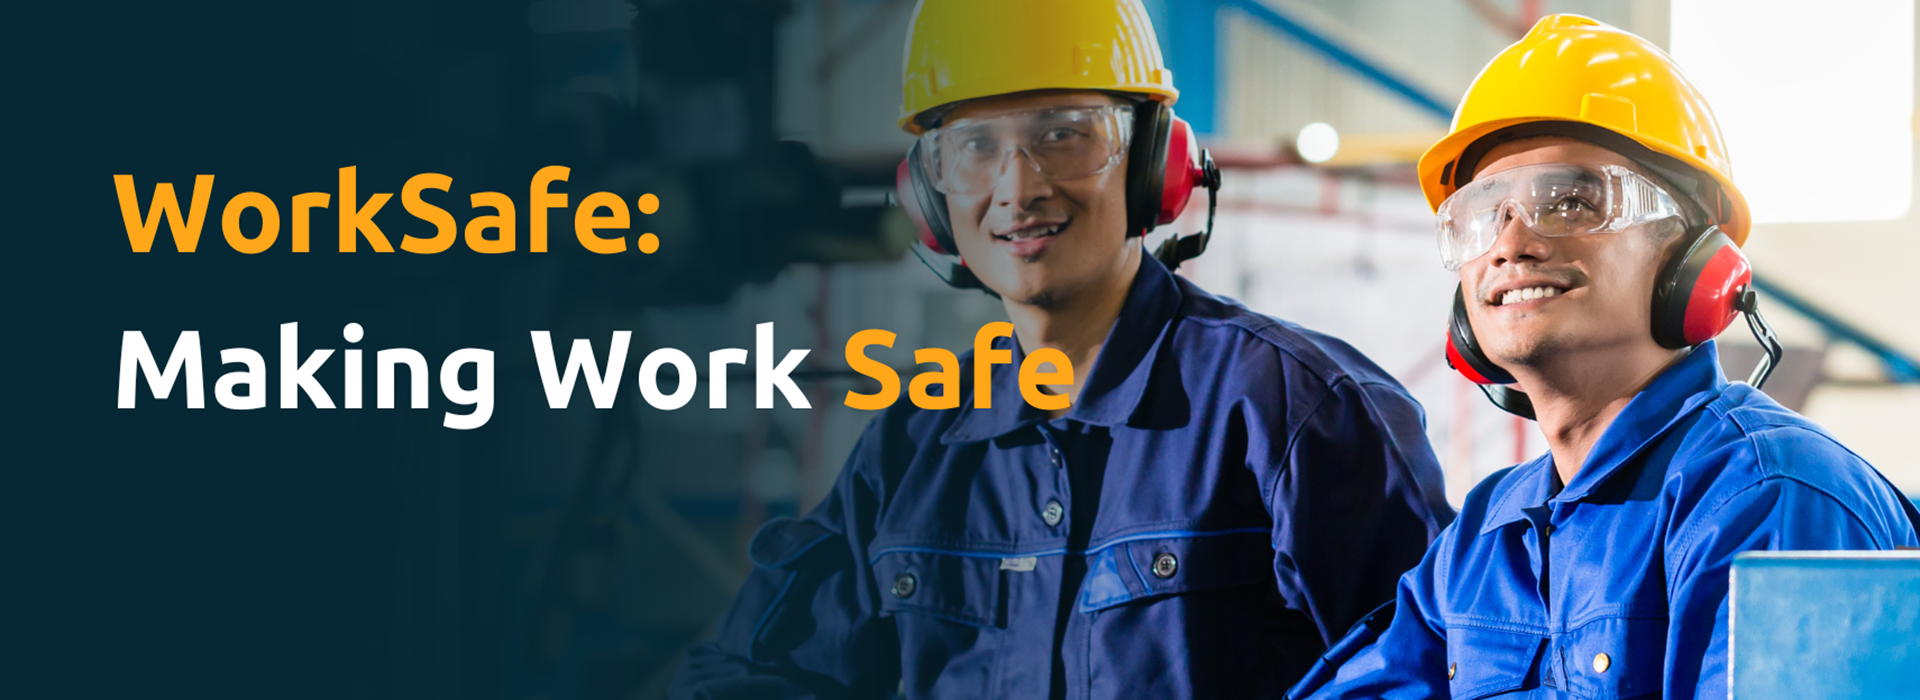 Worksafe 1St Article Cover Image